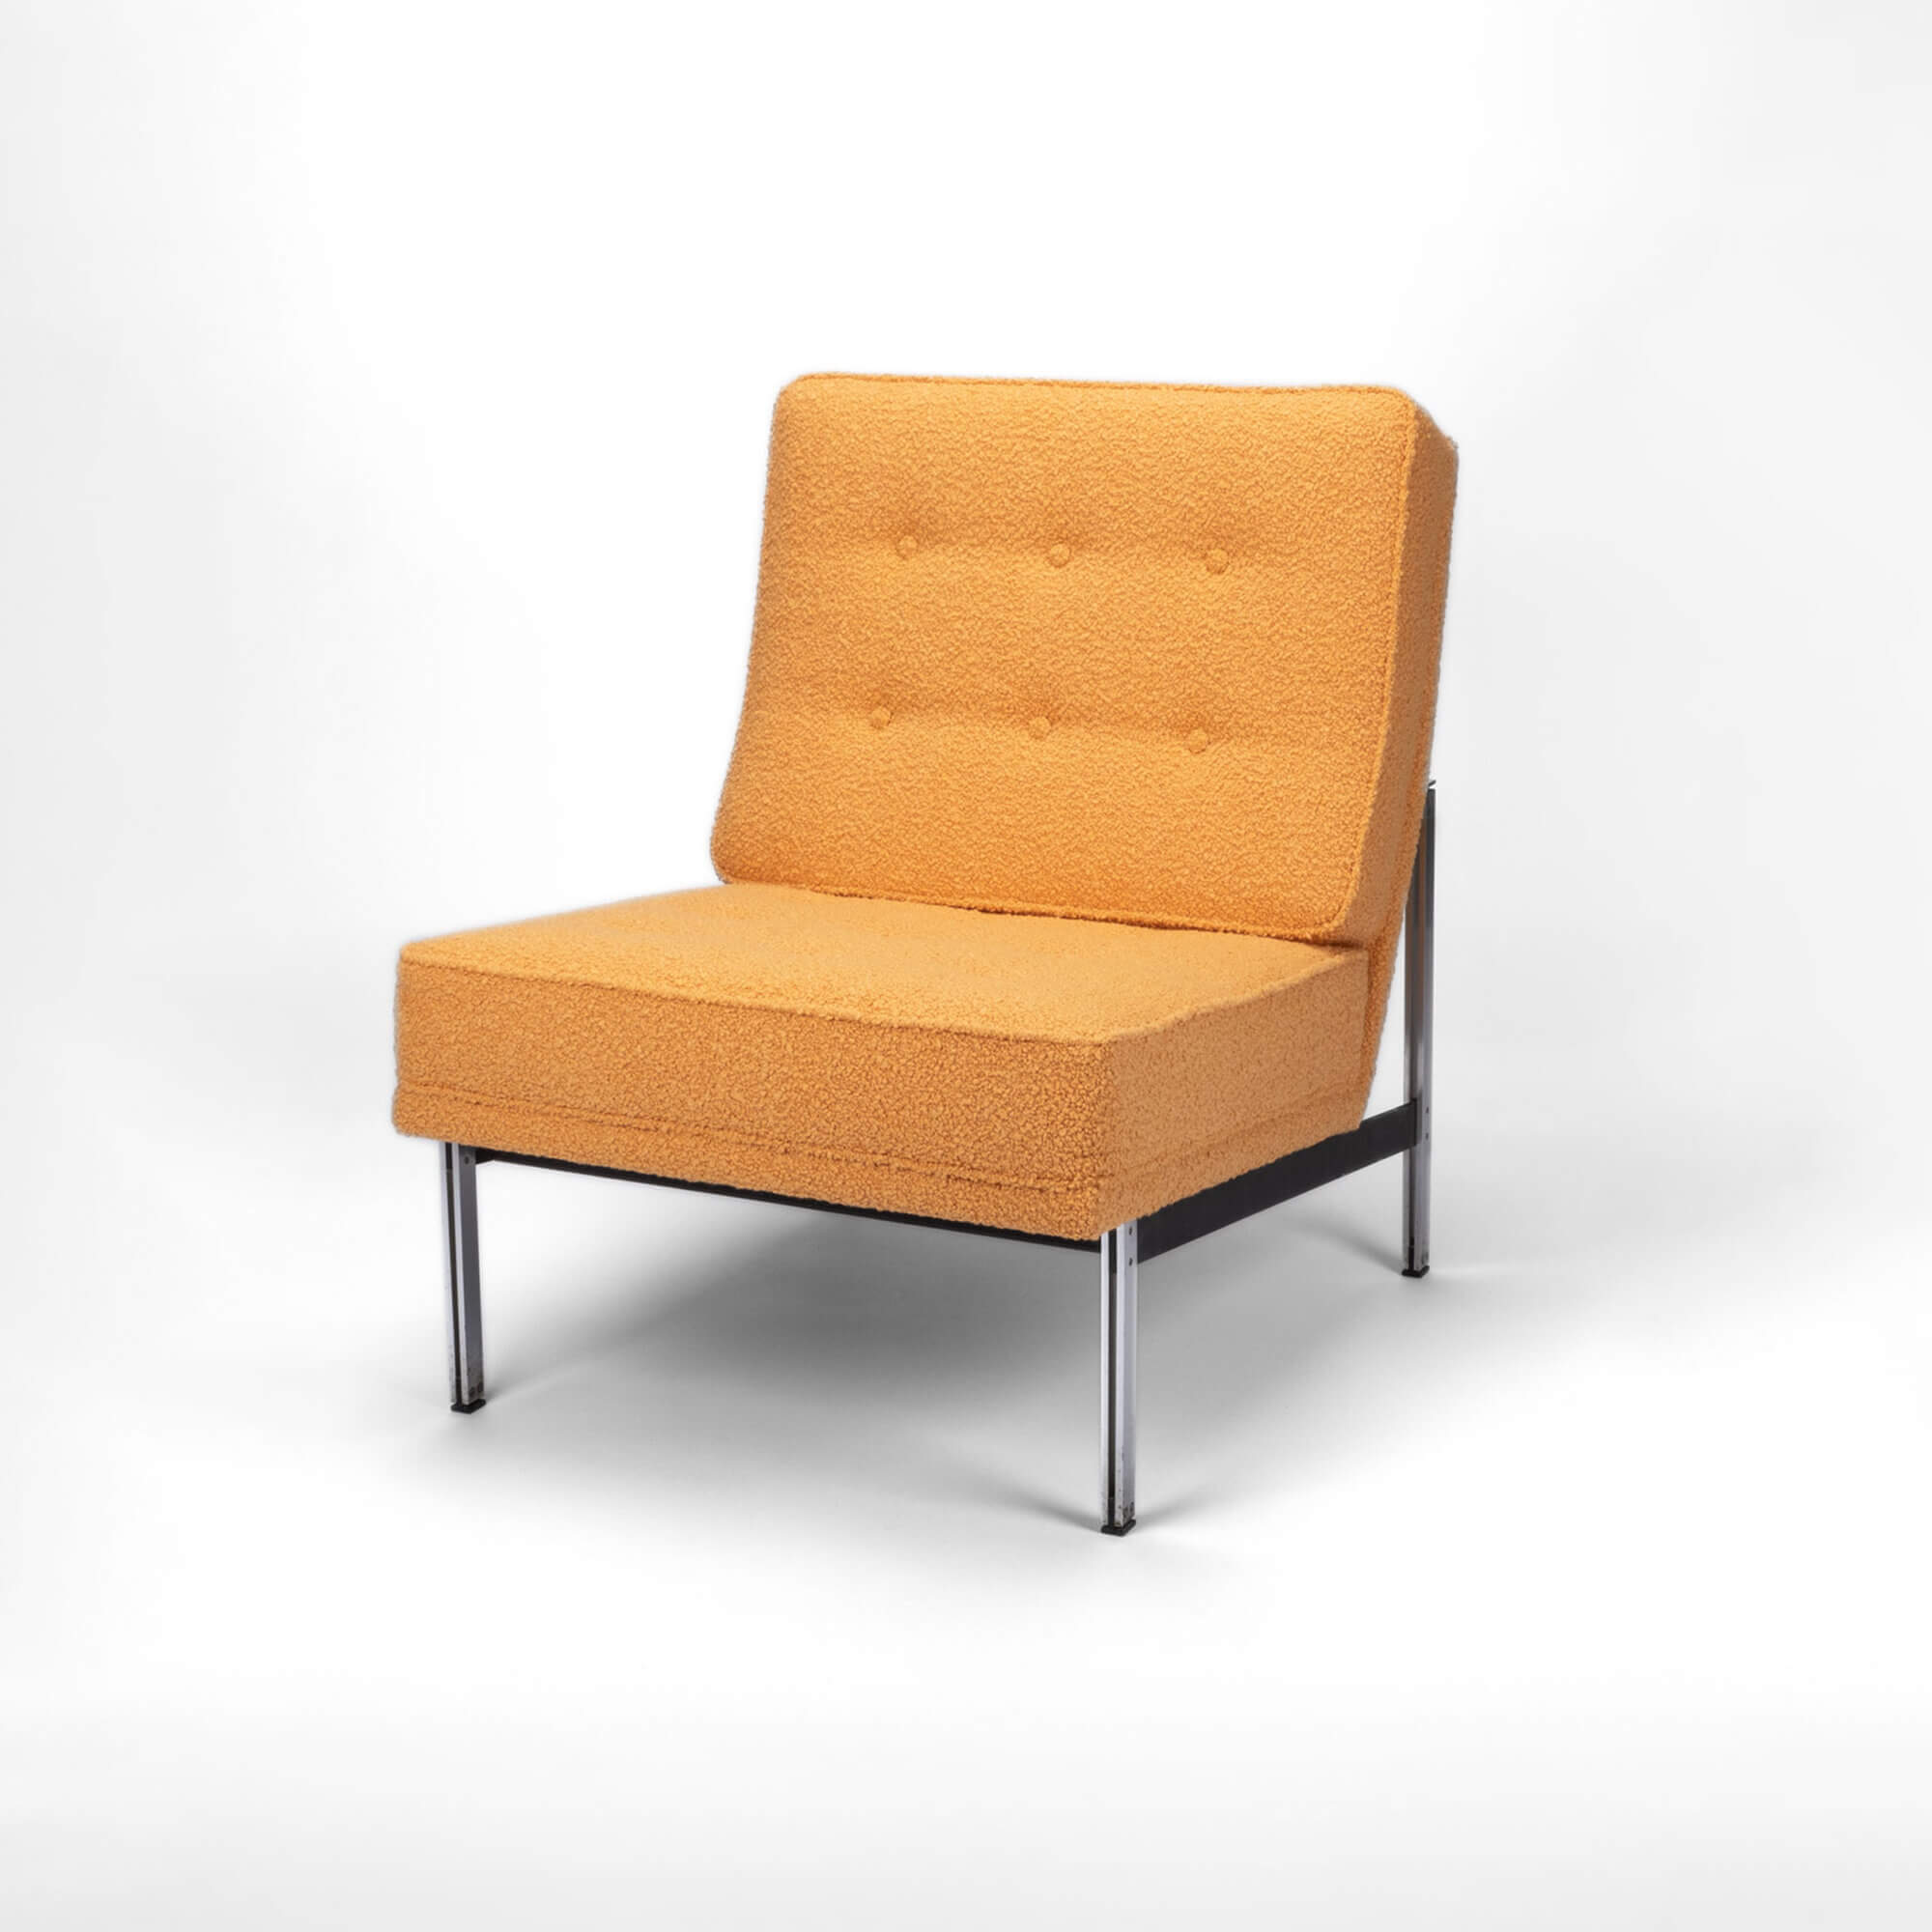 Florence-Knoll-Parallel-Bar-Lounge-Chair-Model-51_1-square